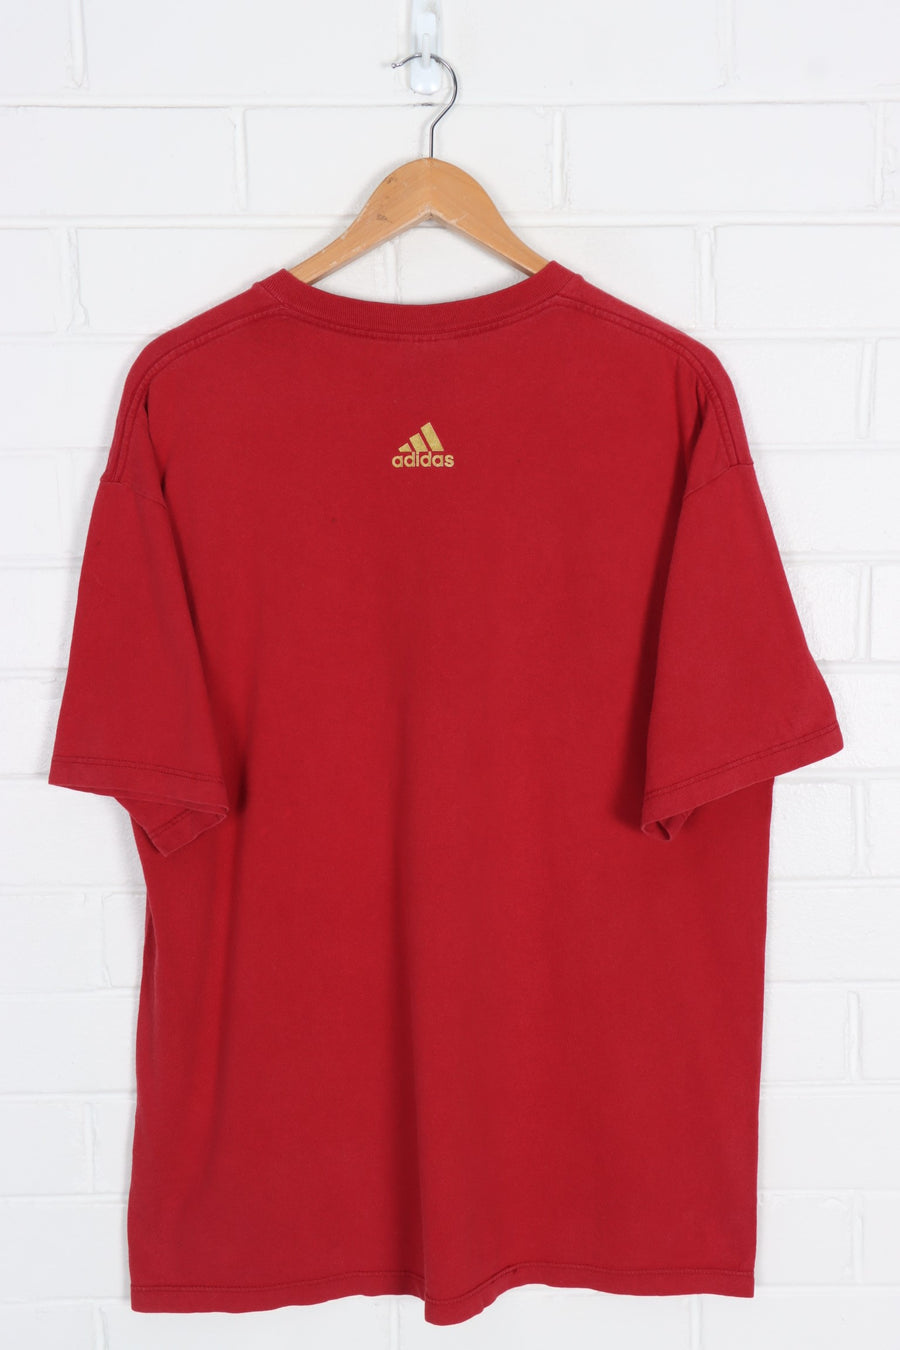 ADIDAS Red & Gold Logo Spell Out Tee (XL)